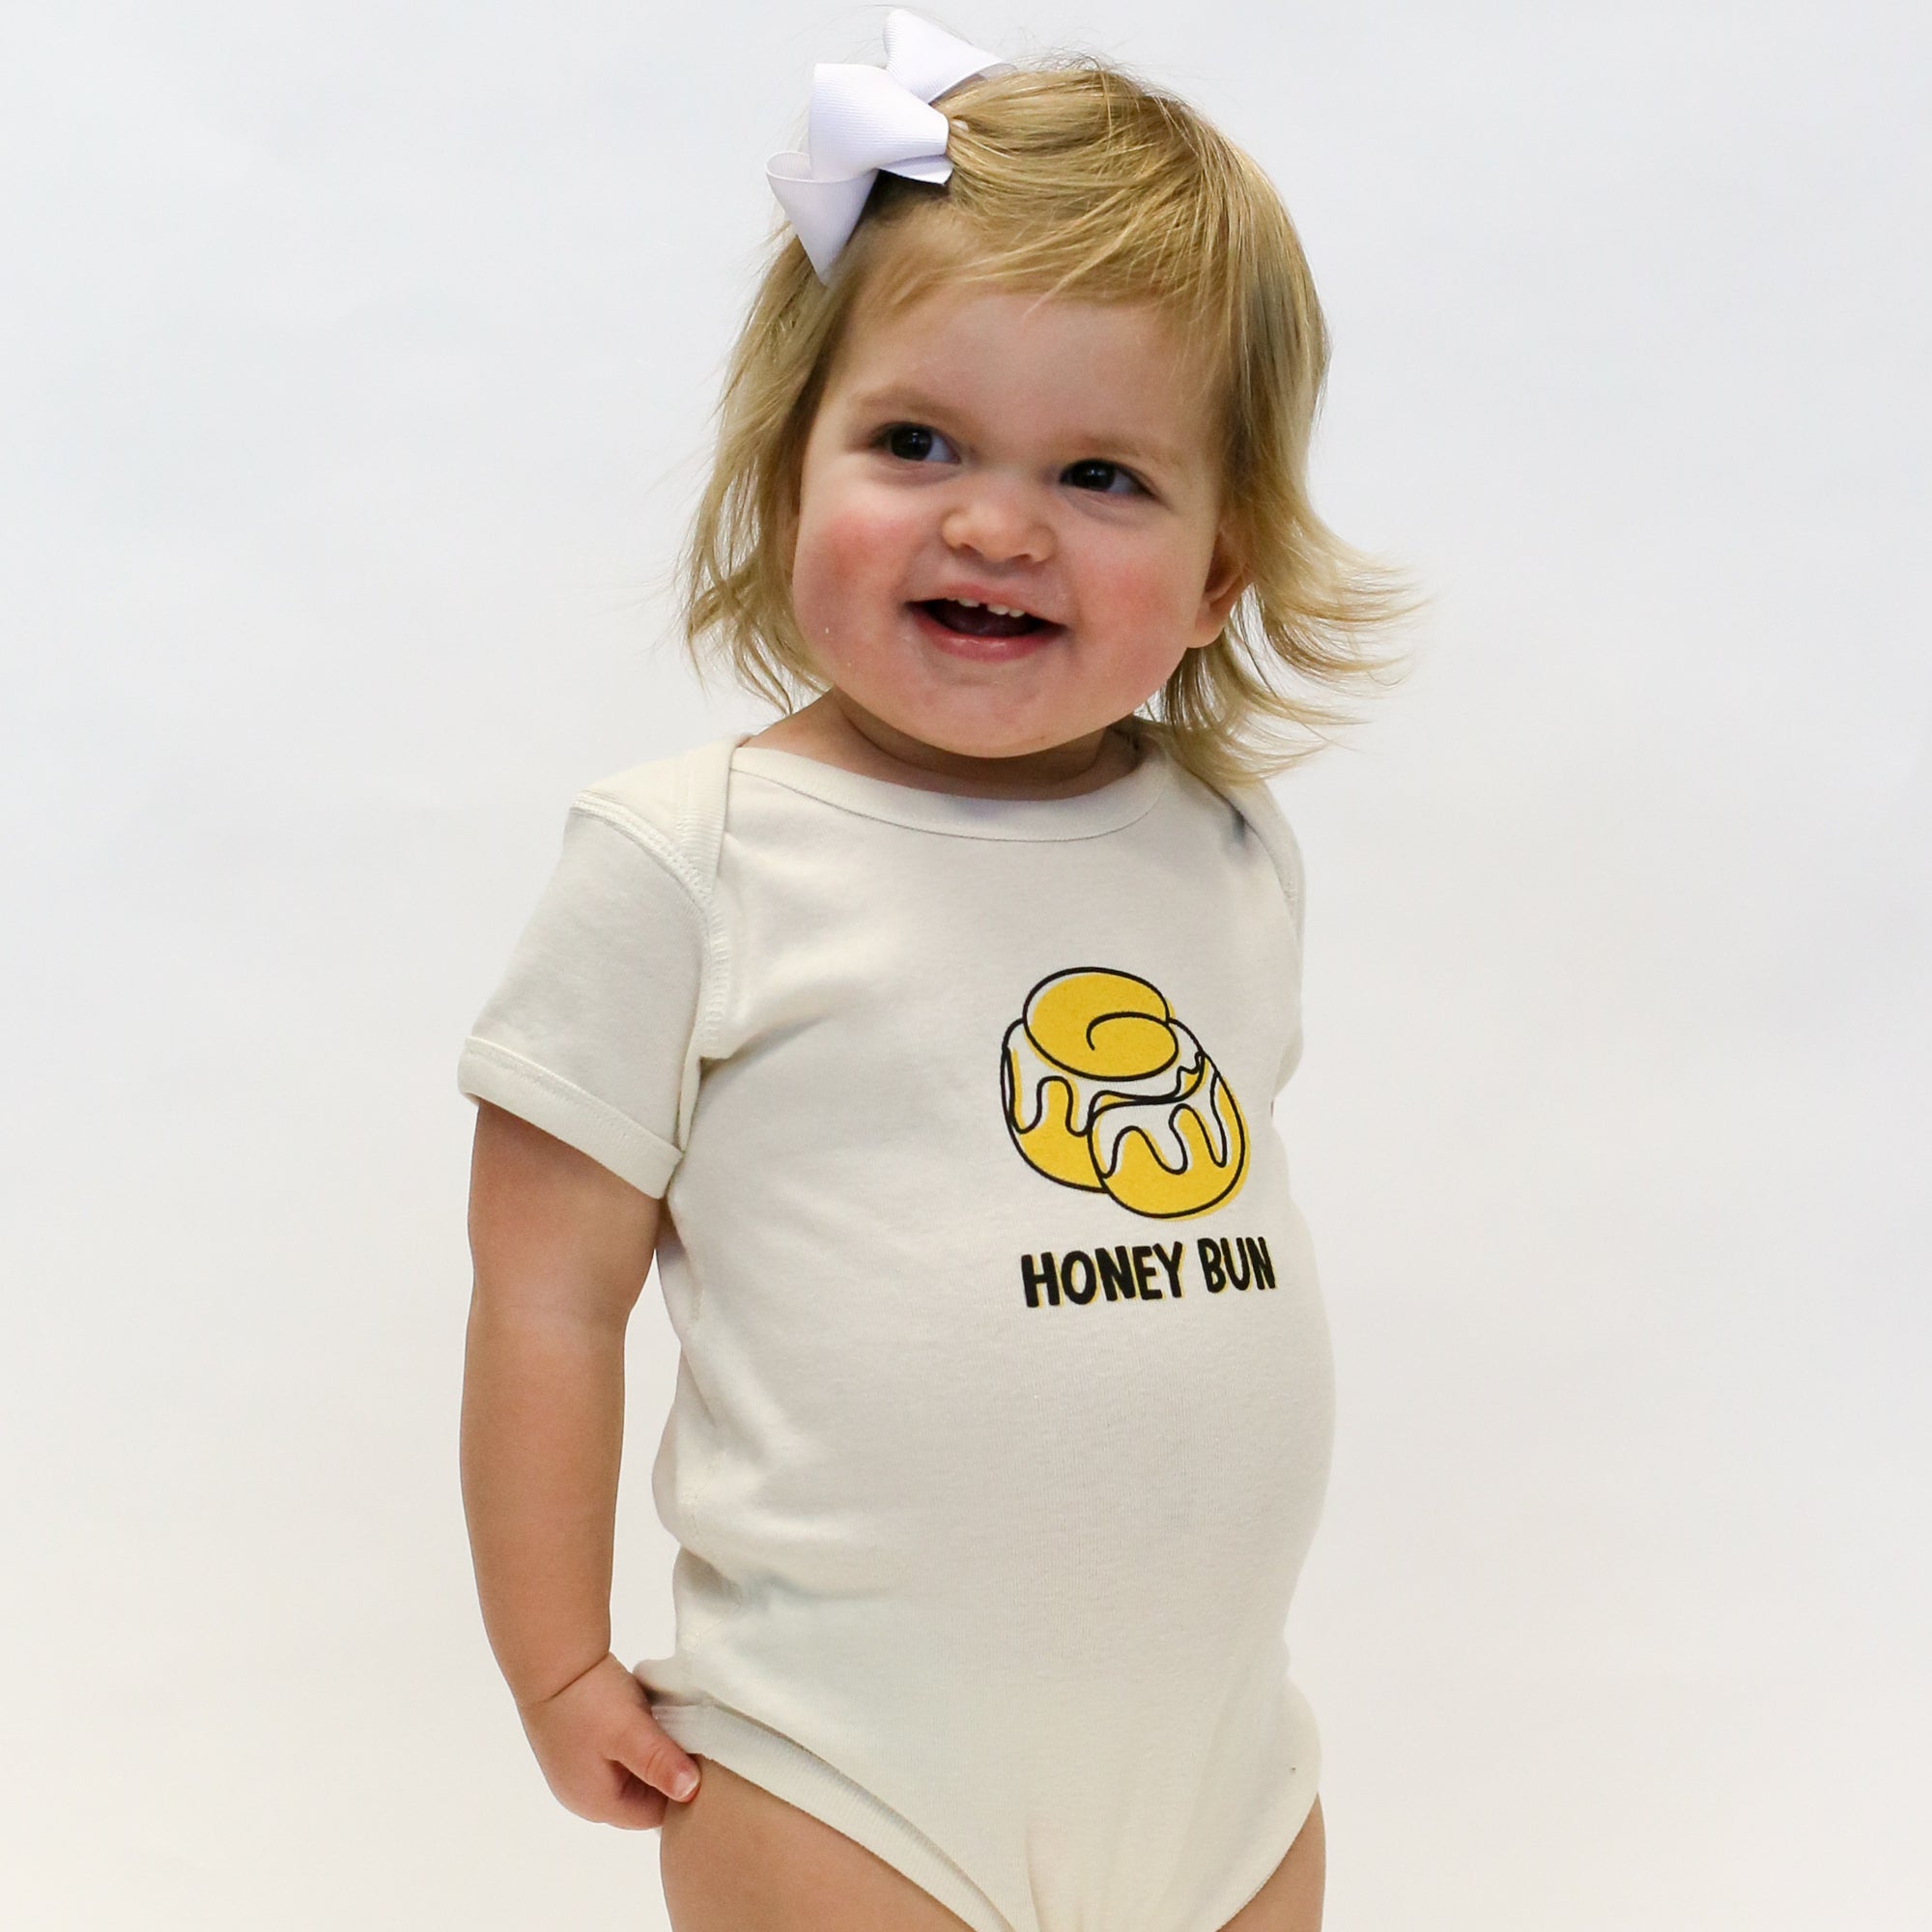 Southern Baby Bodysuits